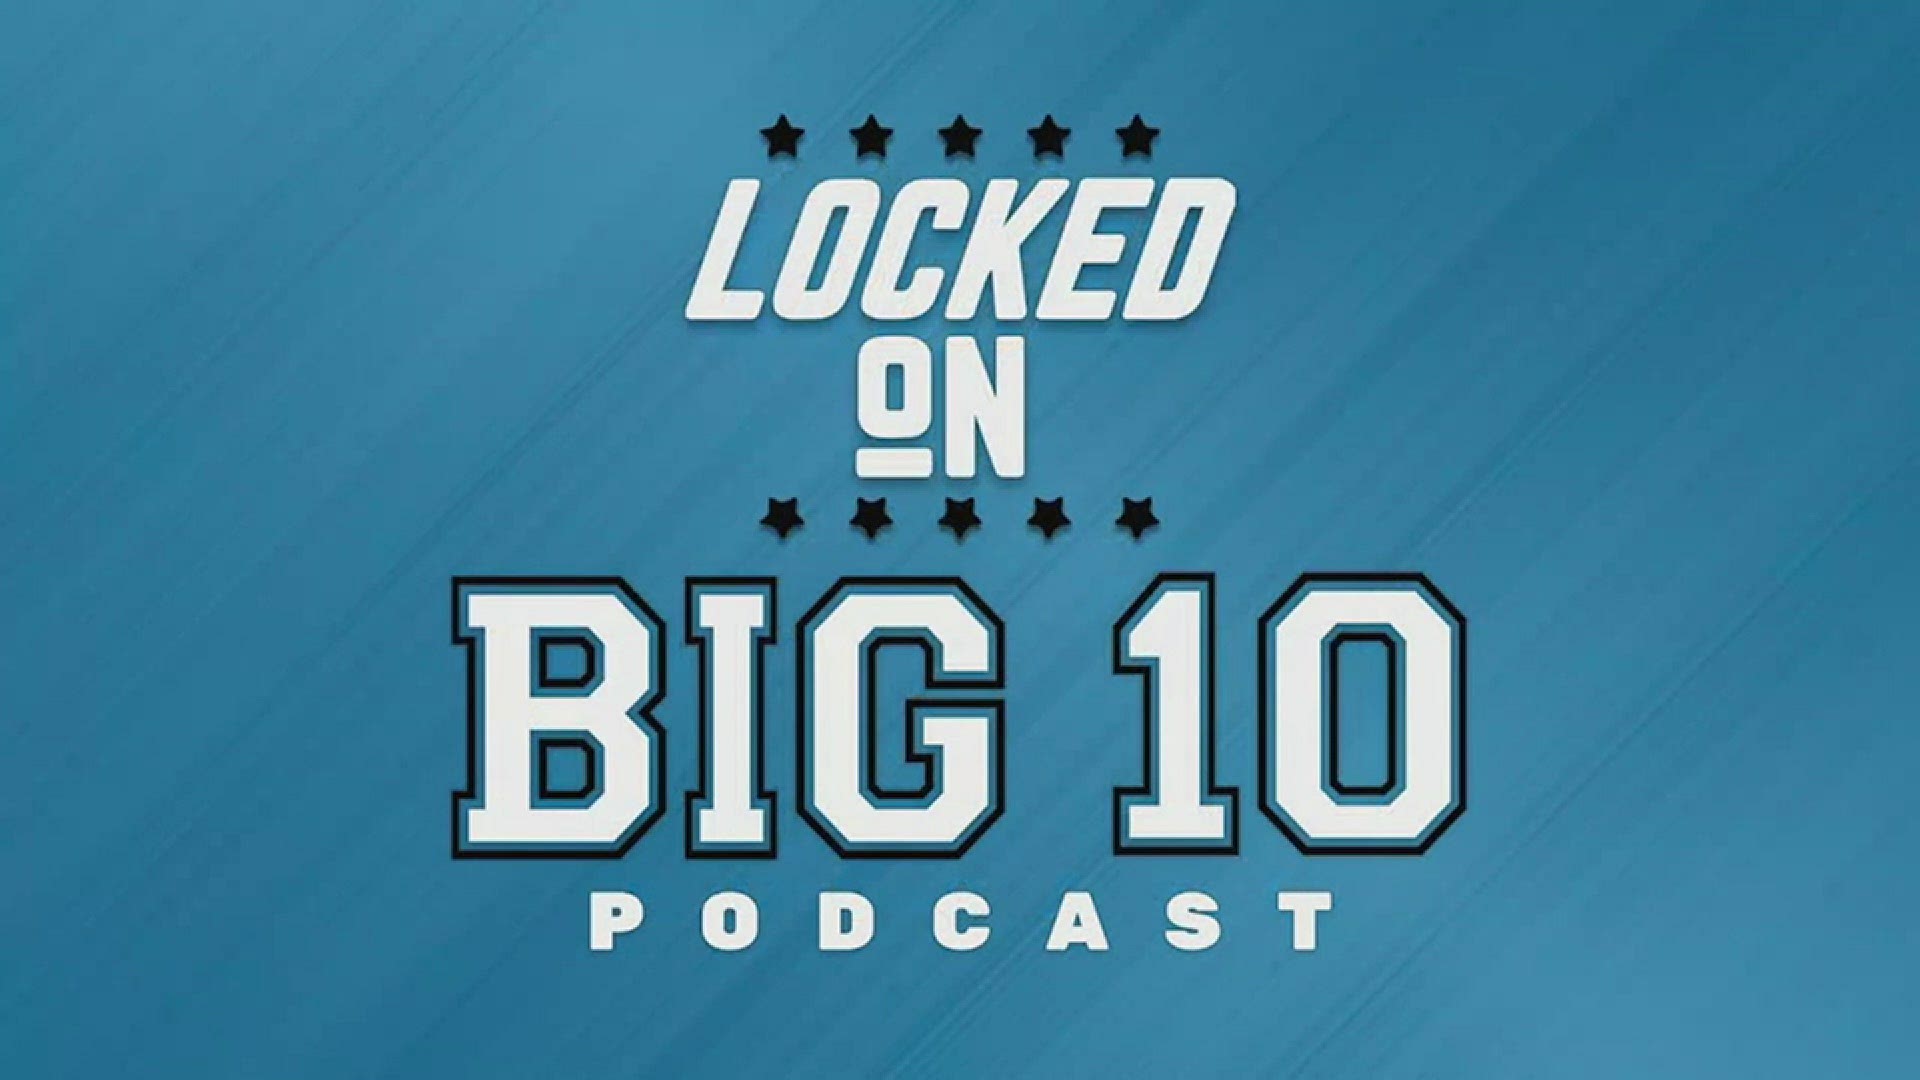 Ben Stevens is joined by Locked On Spartans' Matt Sheehan to discuss crazy possibilities for the Big Ten in 2021.